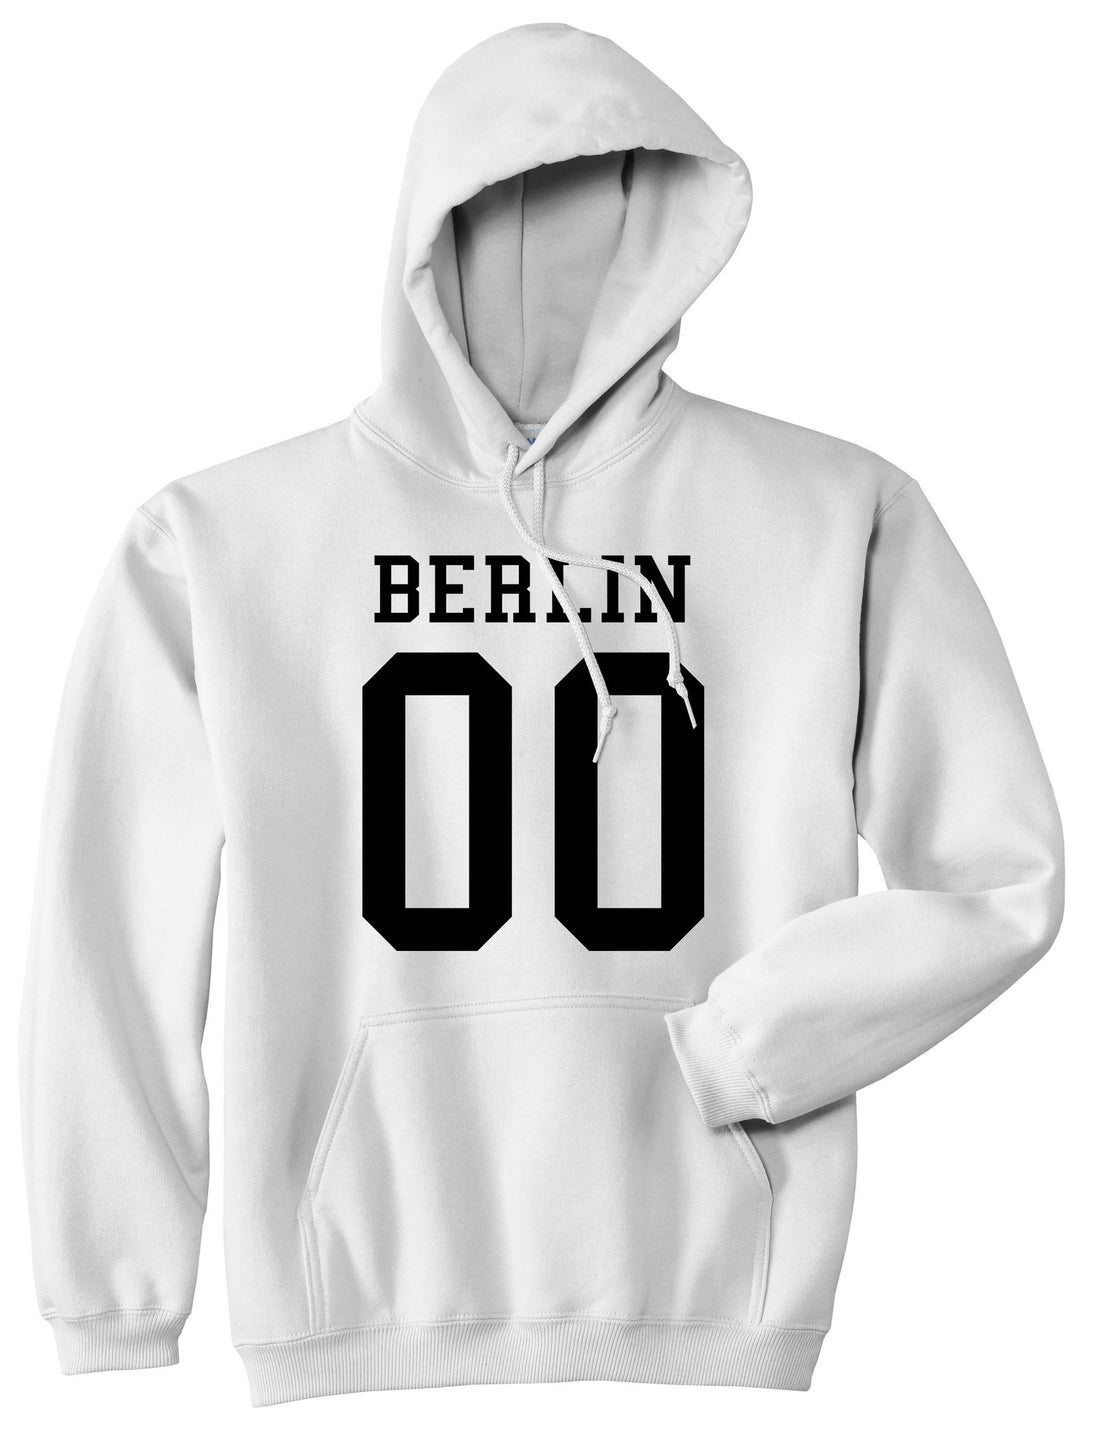 Berlin Team Jersey Germany Country Boys Kids Pullover Hoodie Hoody in White By Kings Of NY